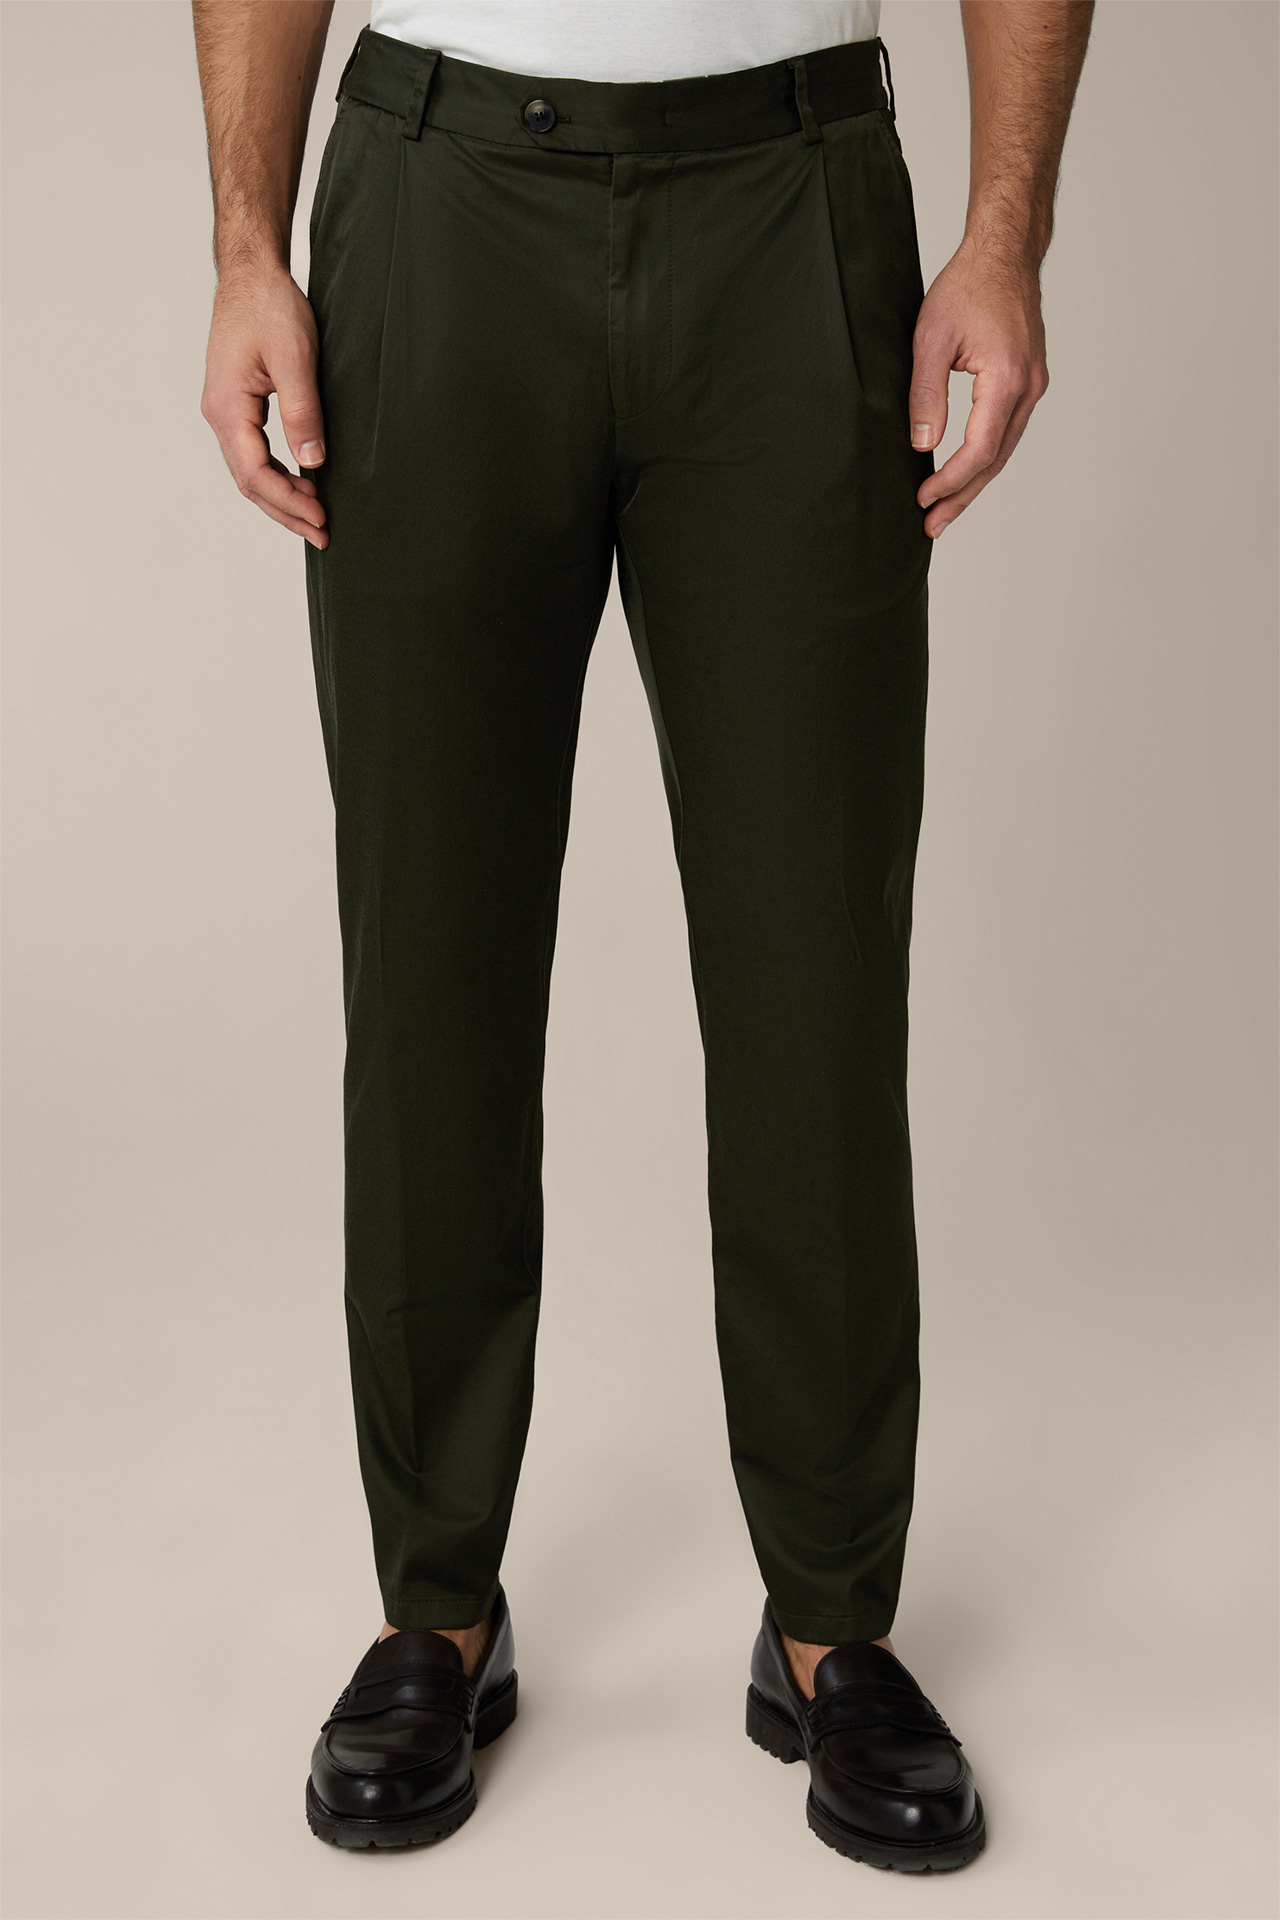 Floro Cotton Mix Modular Trousers in Olive